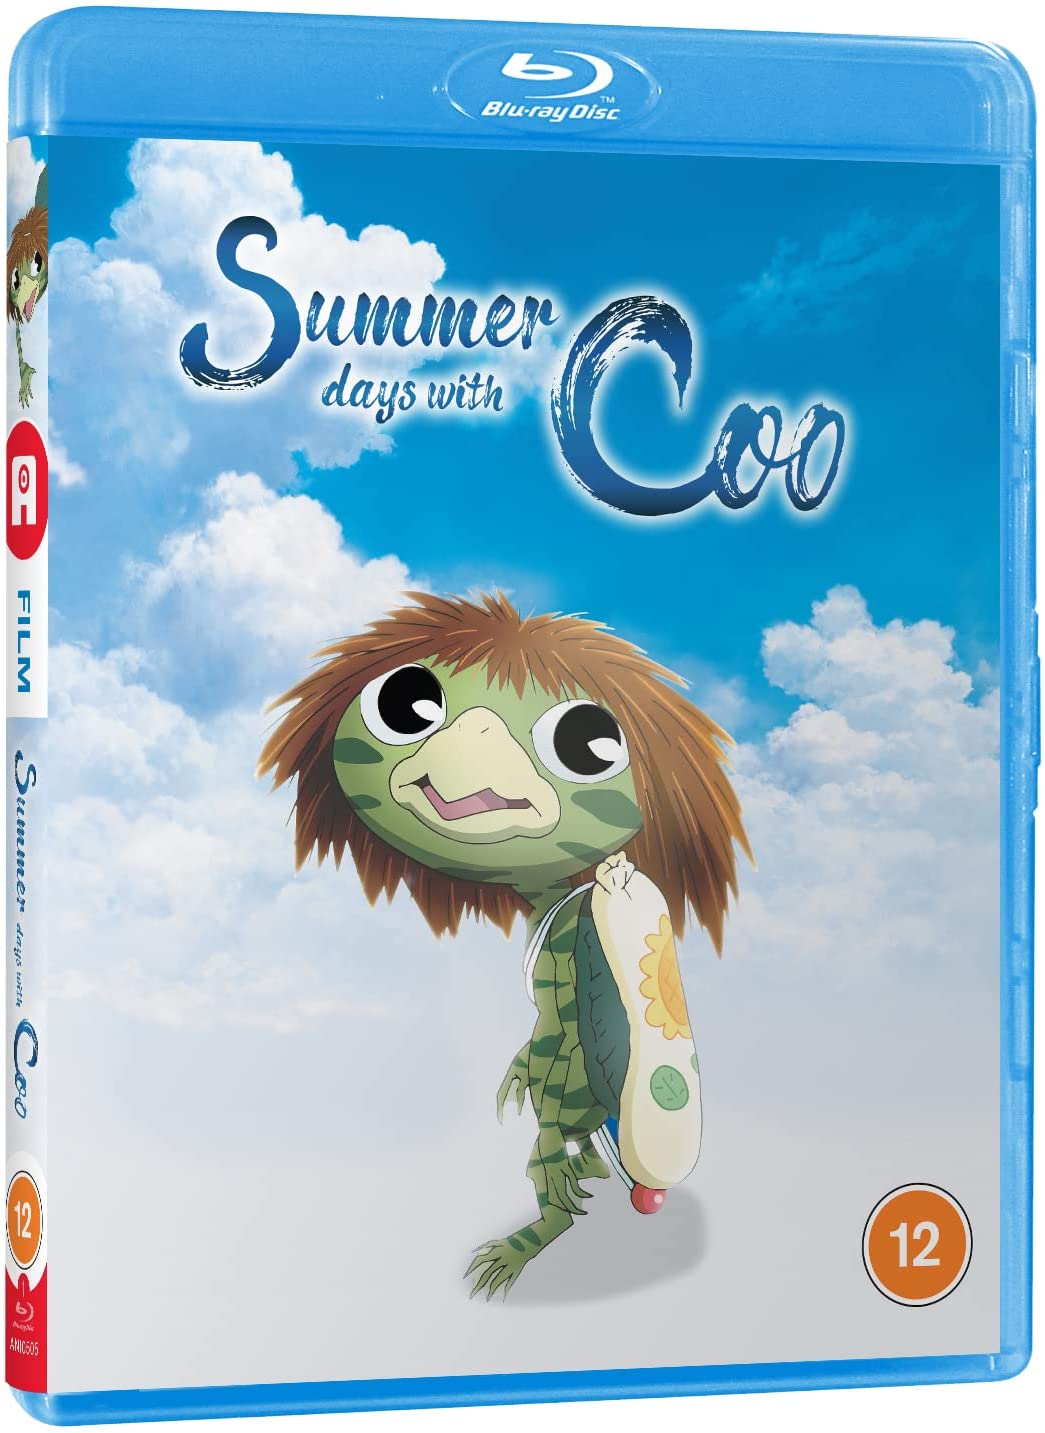 Summer Days with Coo (Standard Edition) [Blu-ray]